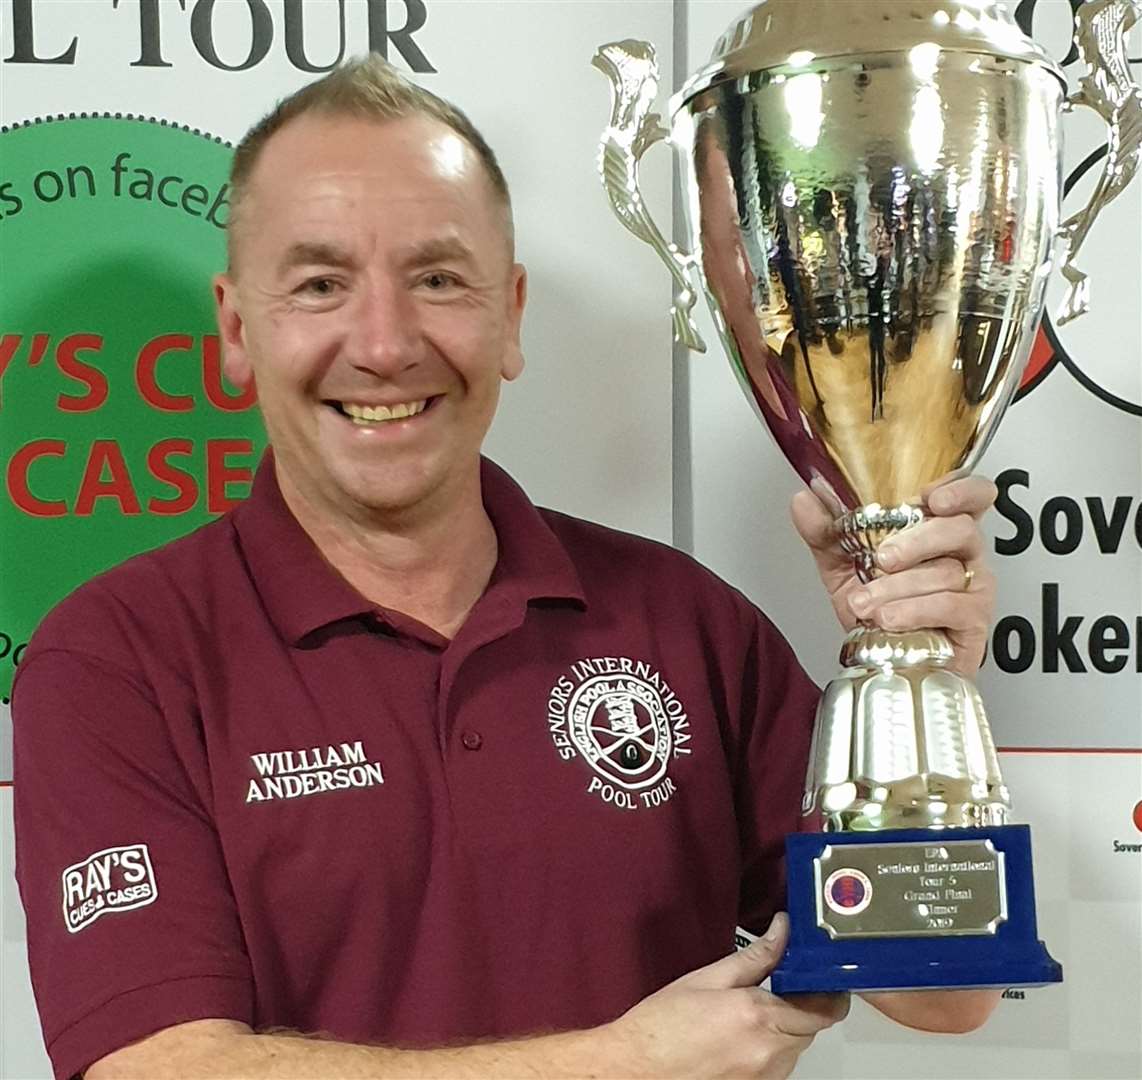 William Anderson with his trophy